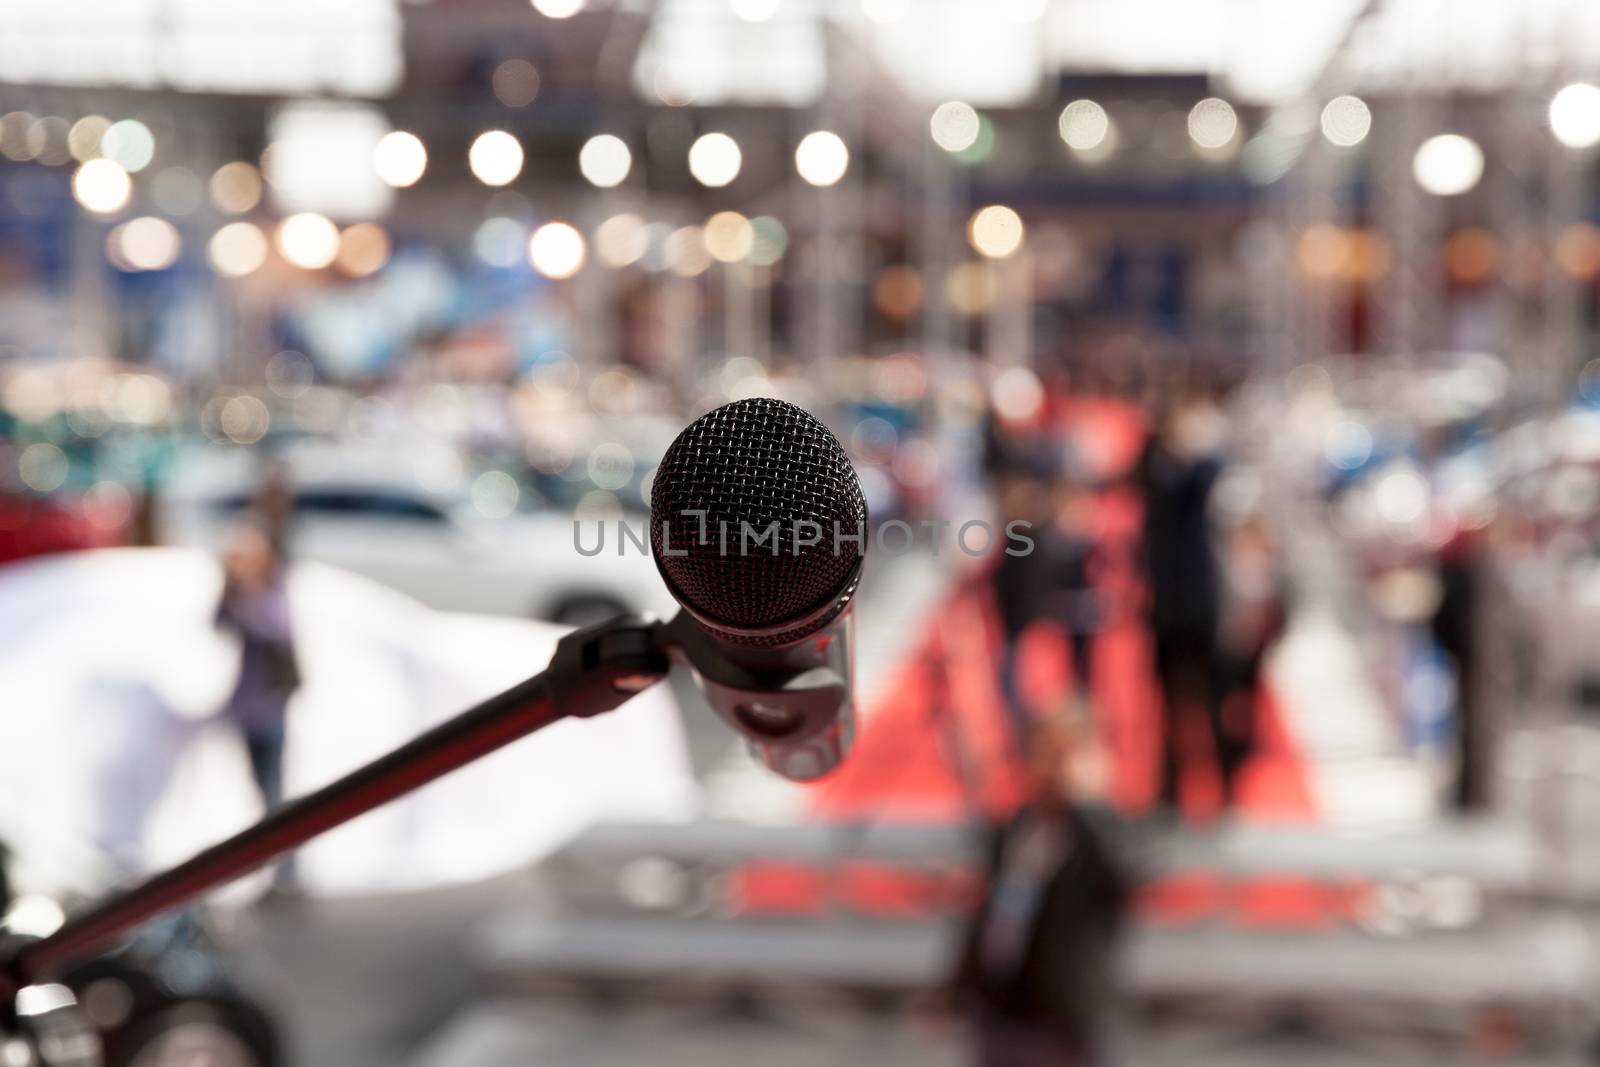 Microphone in focus against blurred background by wellphoto